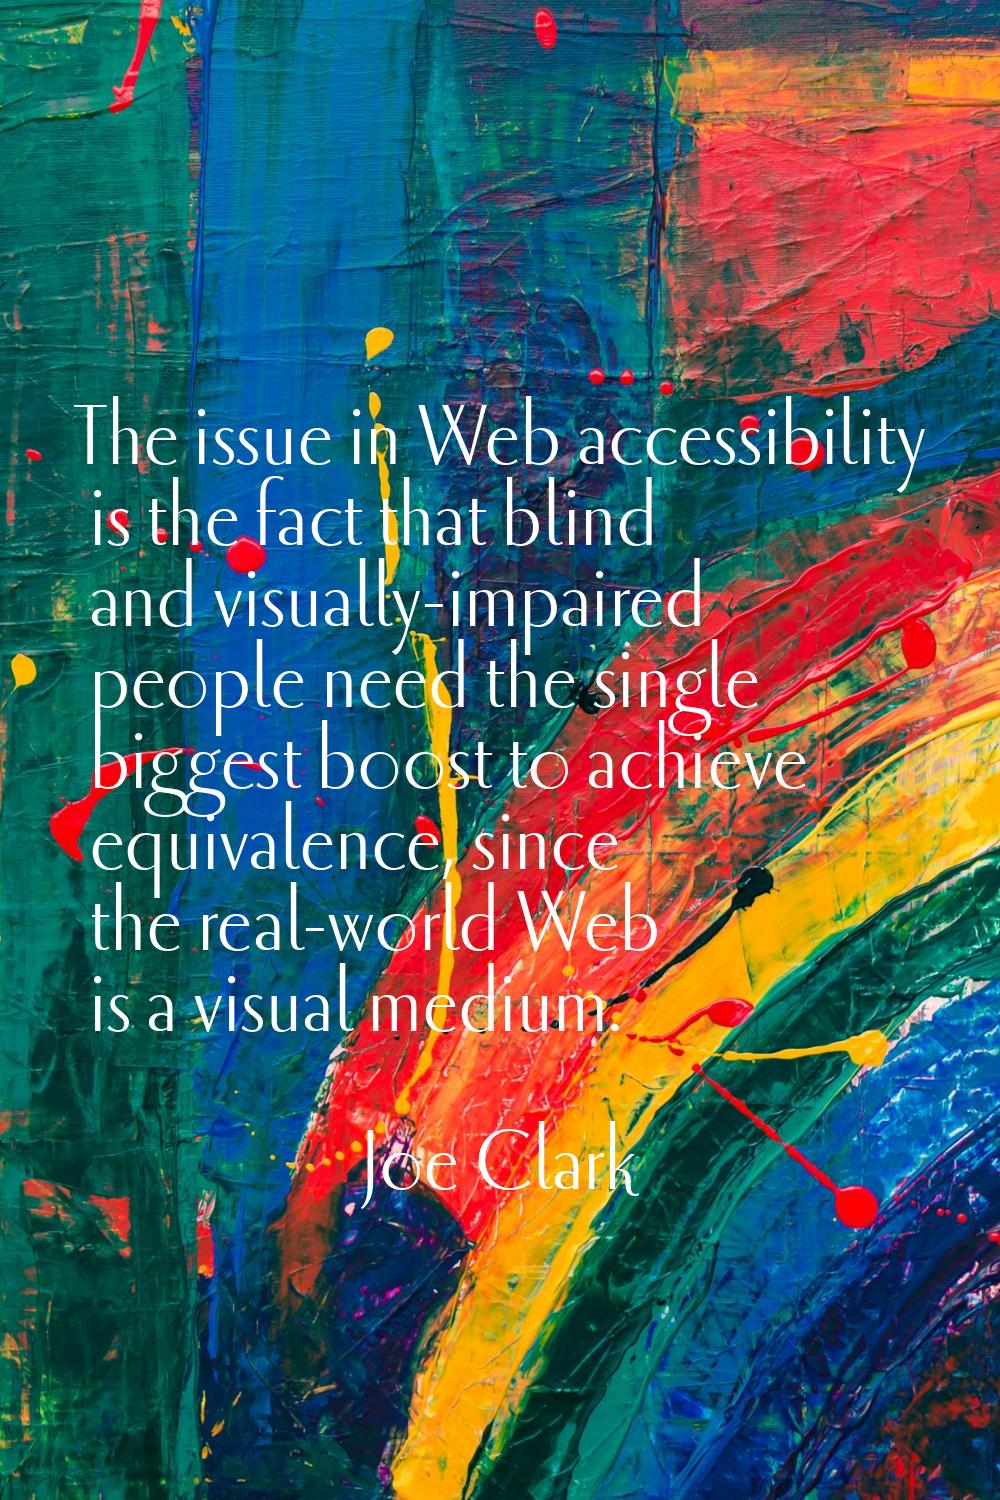 The issue in Web accessibility is the fact that blind and visually-impaired people need the single 